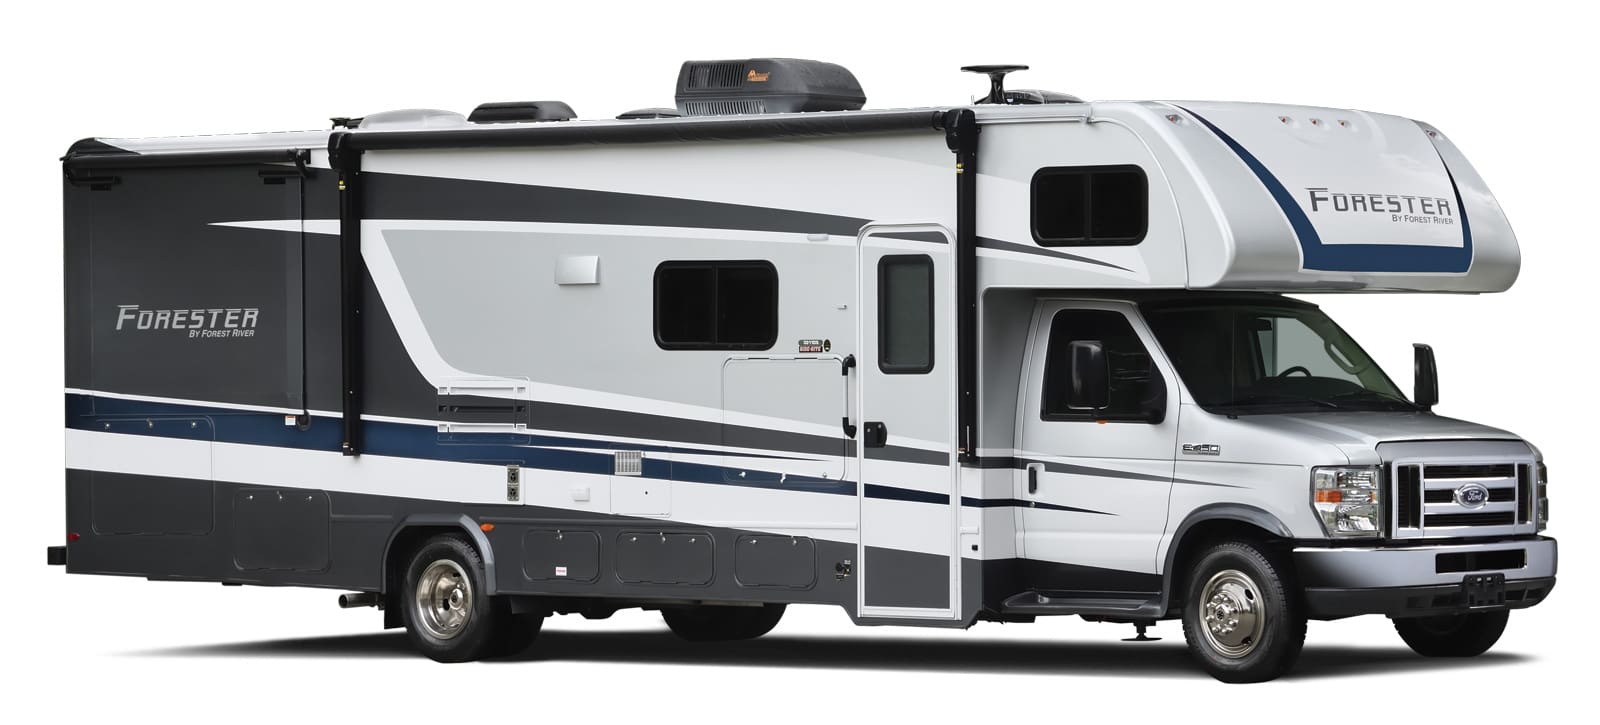 Best Motorhome Brands: Which One Is Right for You?